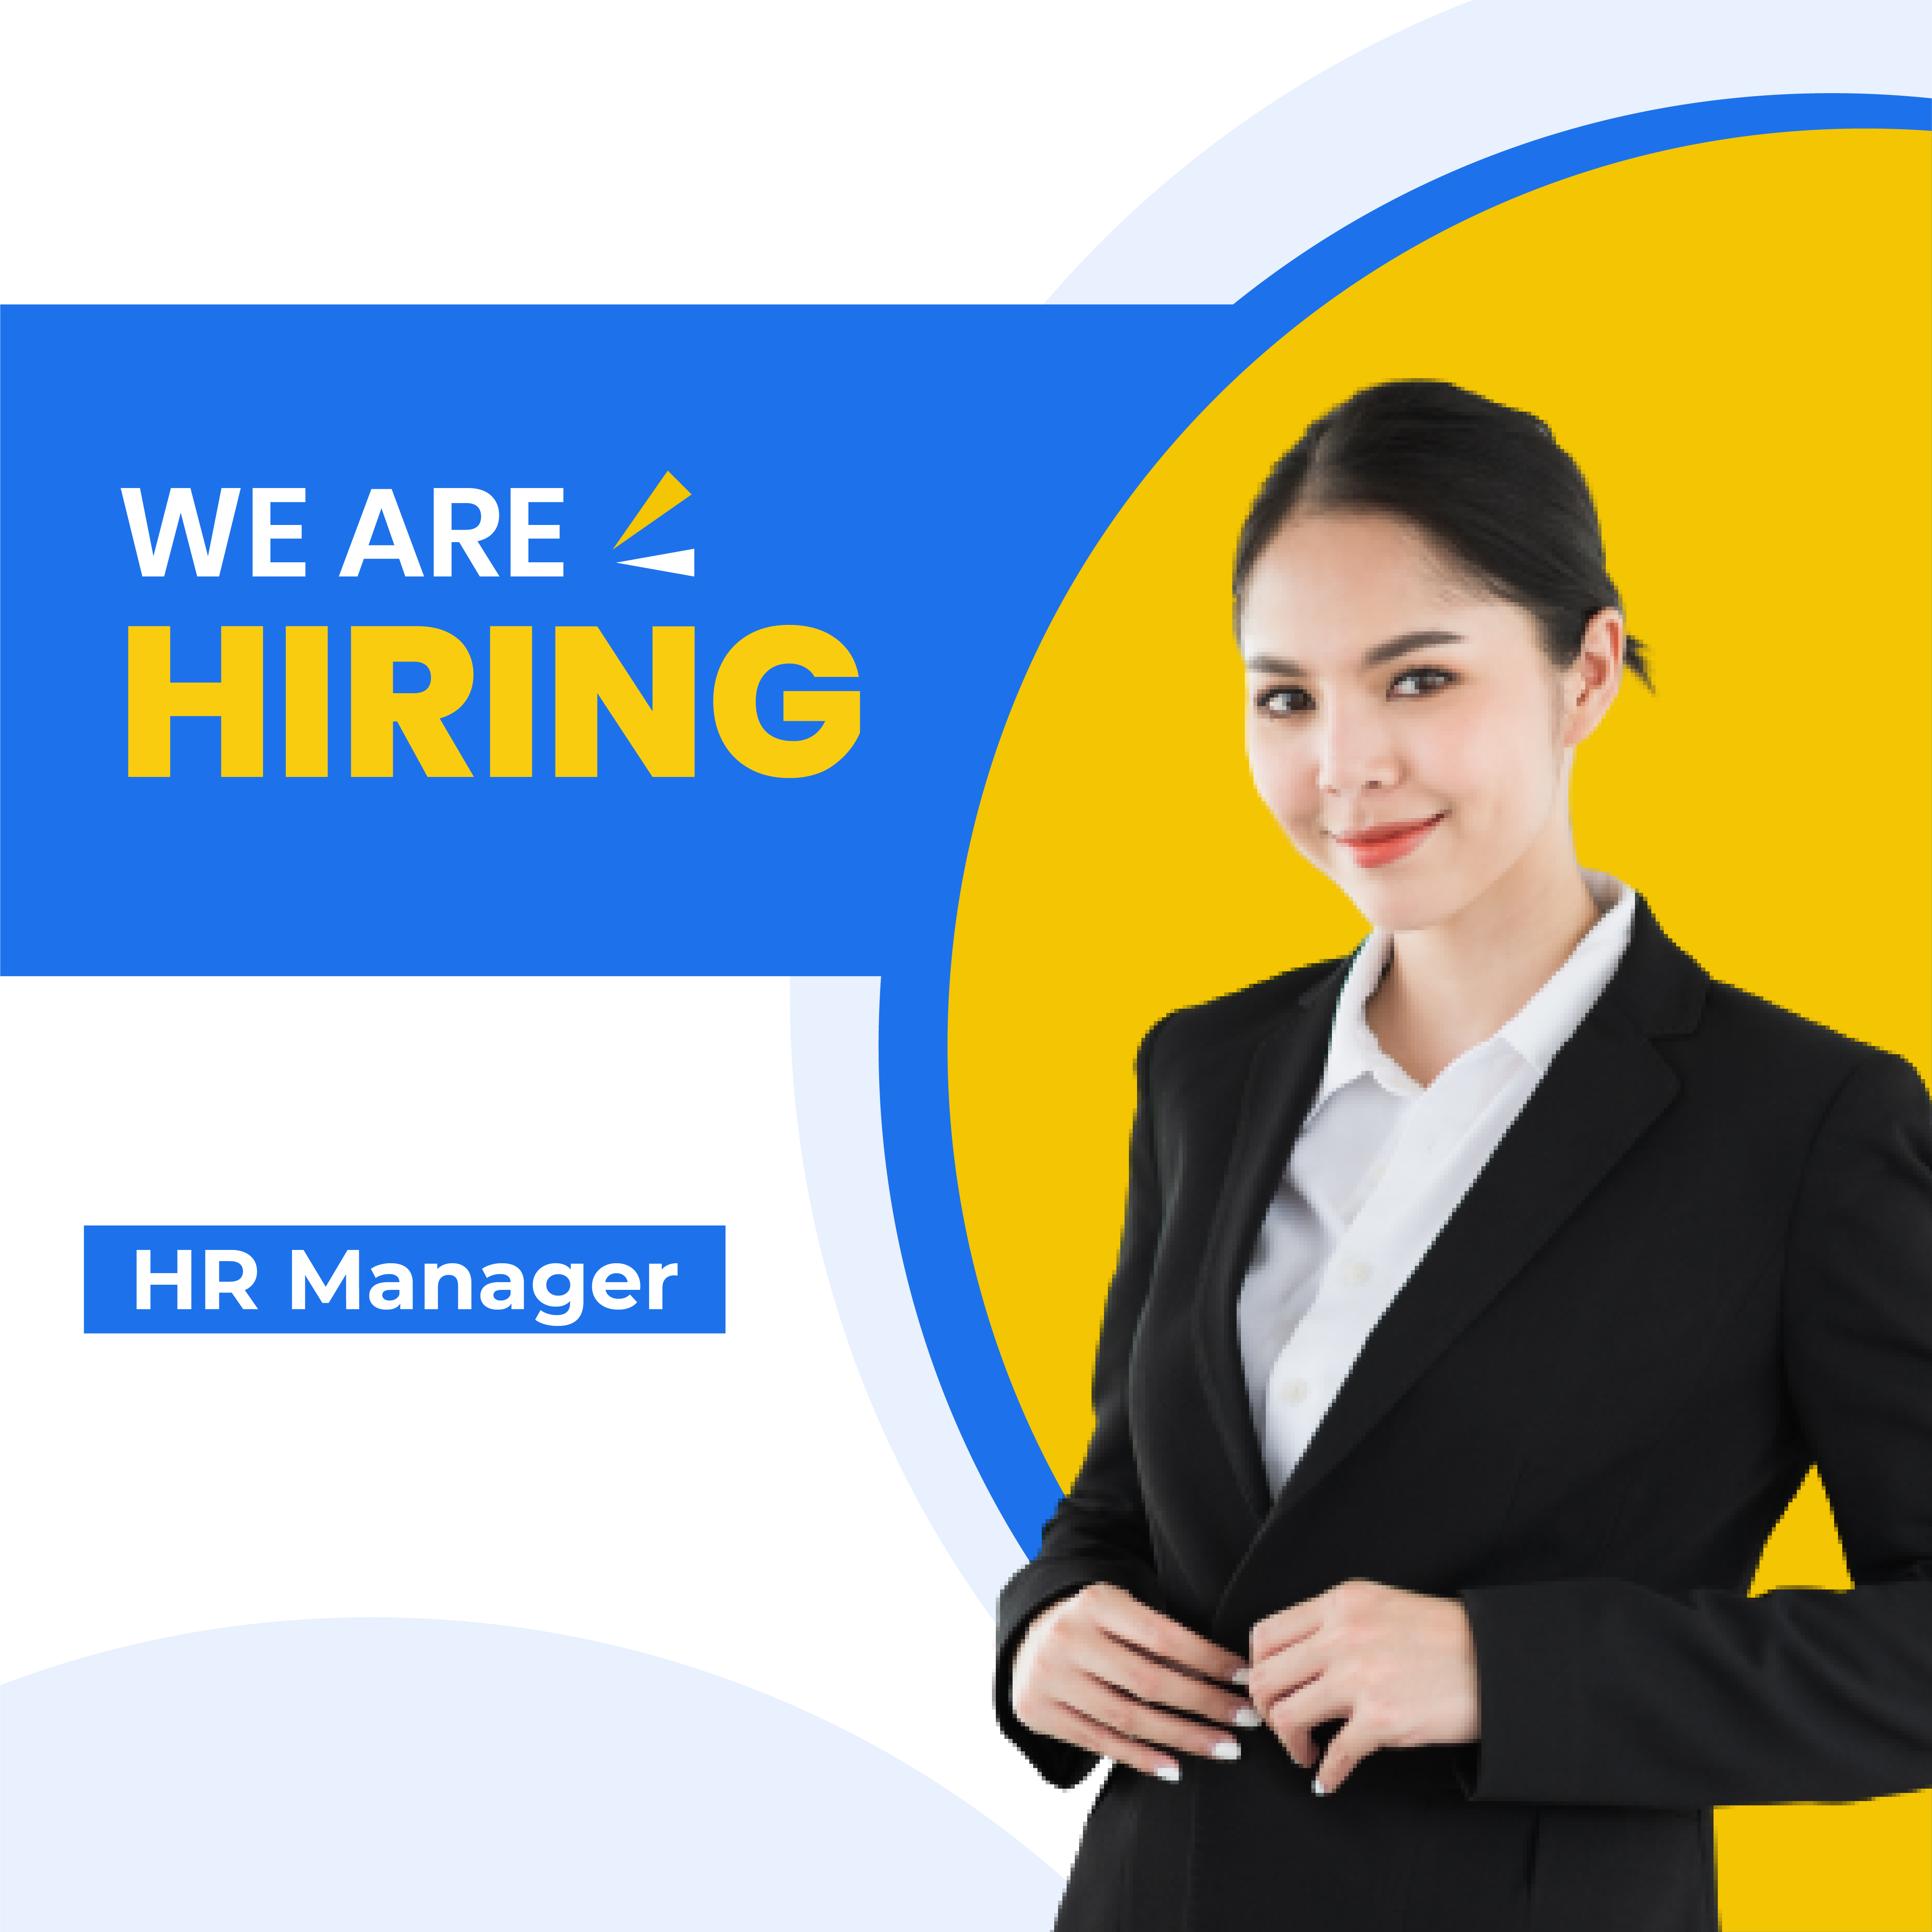 hr manager